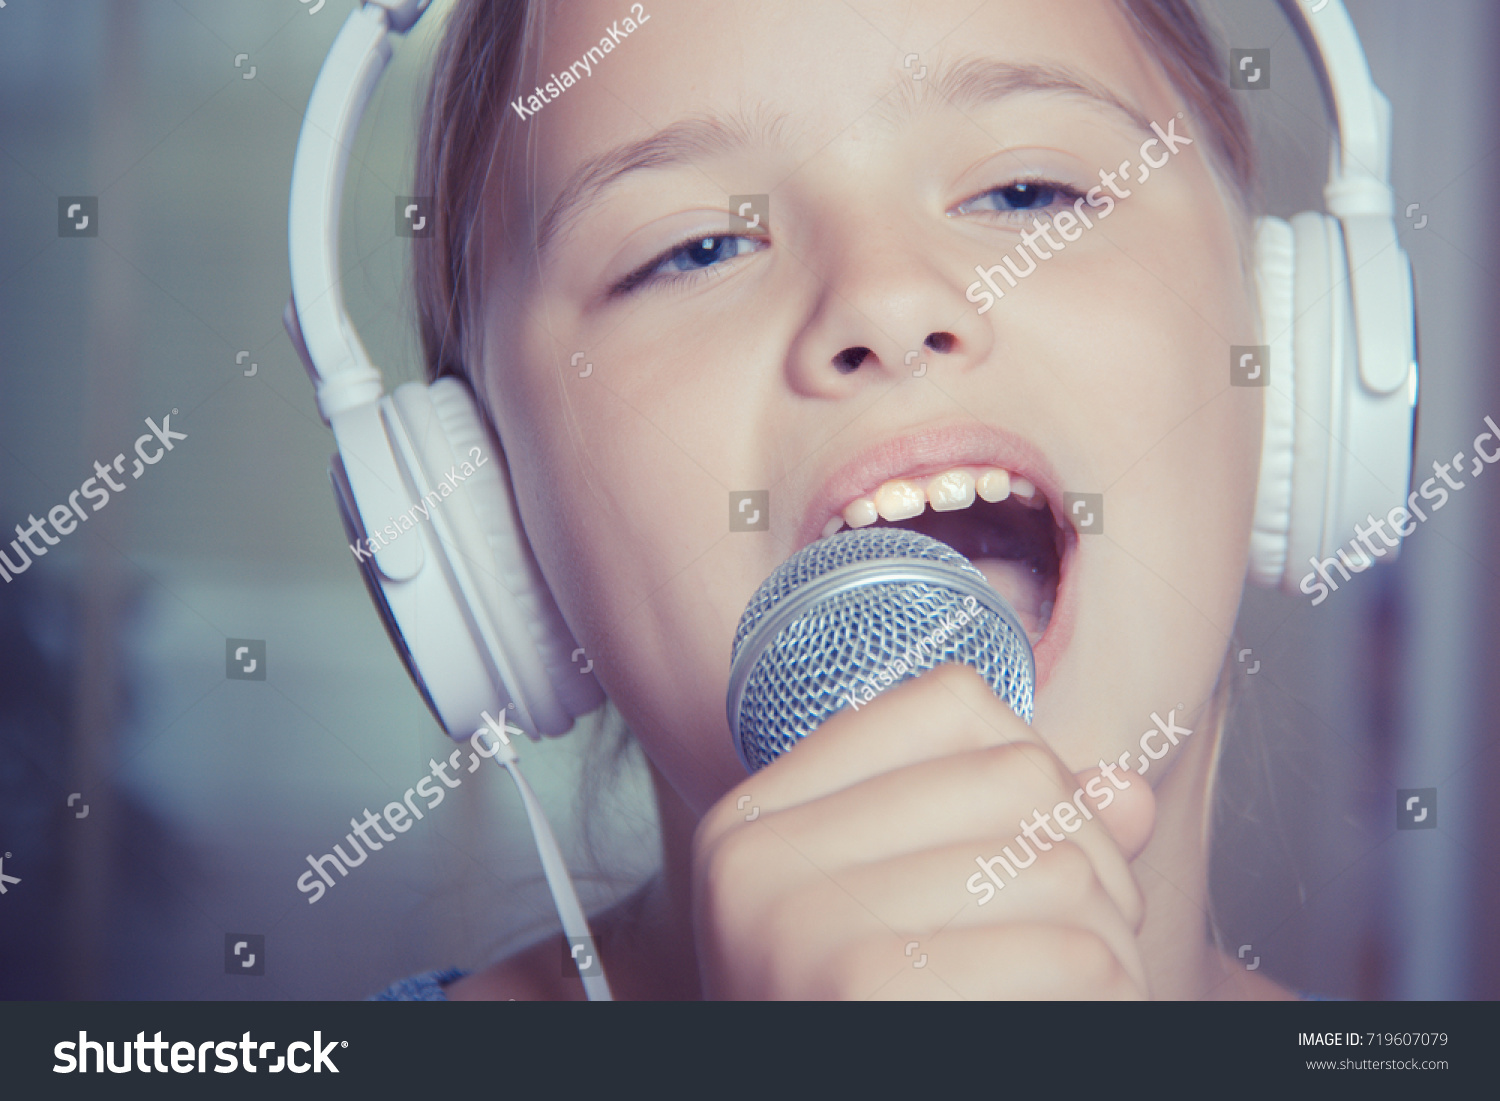 Closeup of singing caucasian child girl. Young girl emotionally sings into the microphone, holding it with hand #719607079